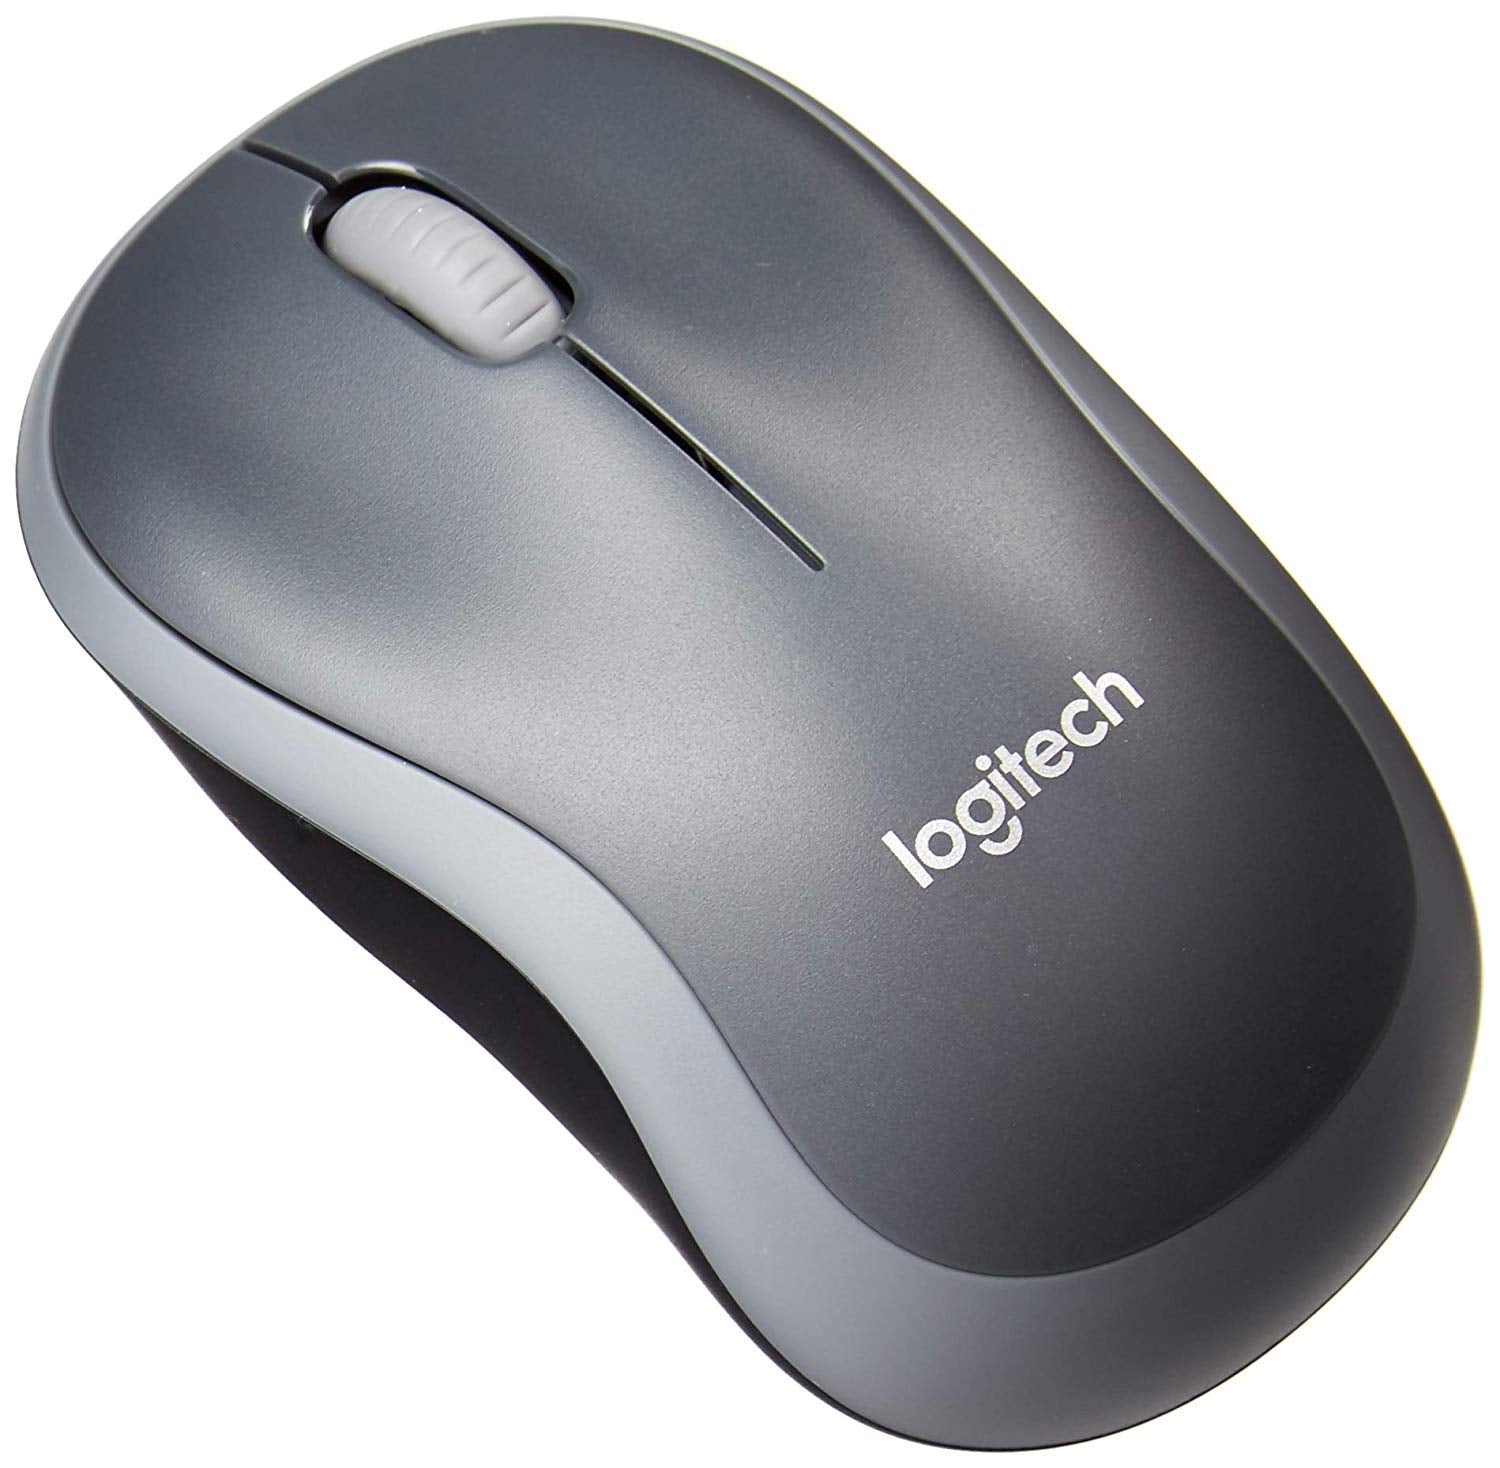 Logitech M185 Wireless Mouse for Computers Laptops Fast Scrolling Bundle (2-Pack + Stylus)